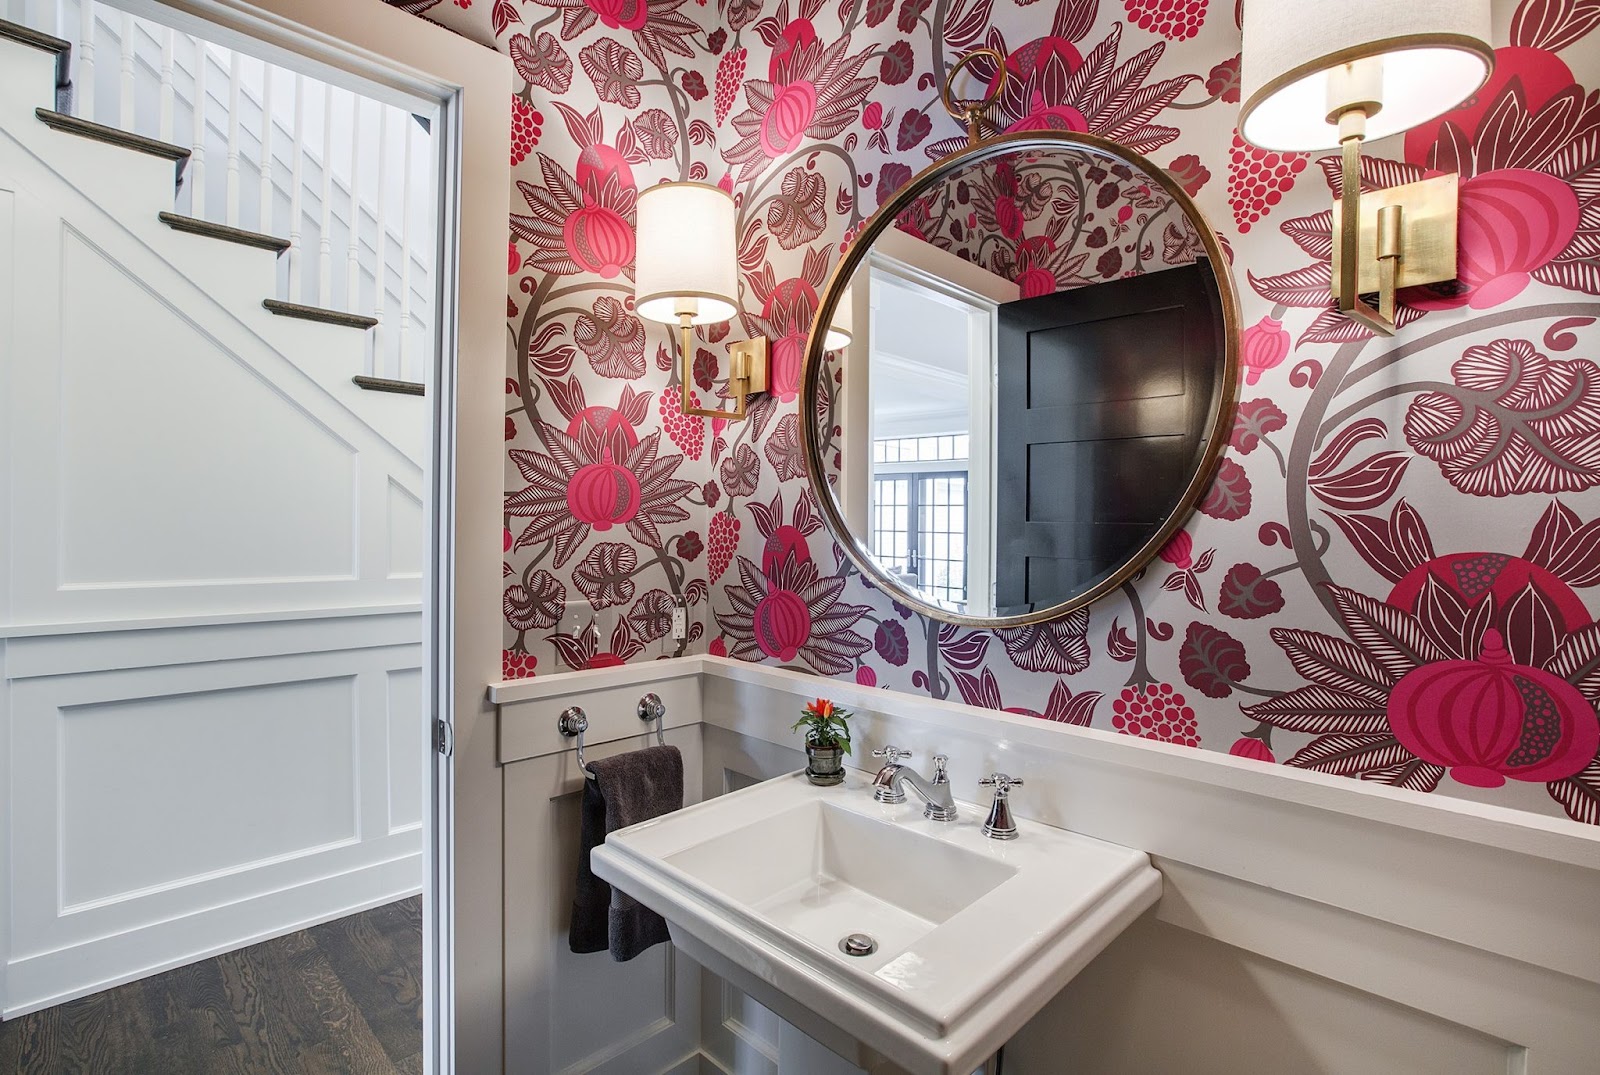 A bathroom with a circular mirror, pedestal sink, and colorful floral walls